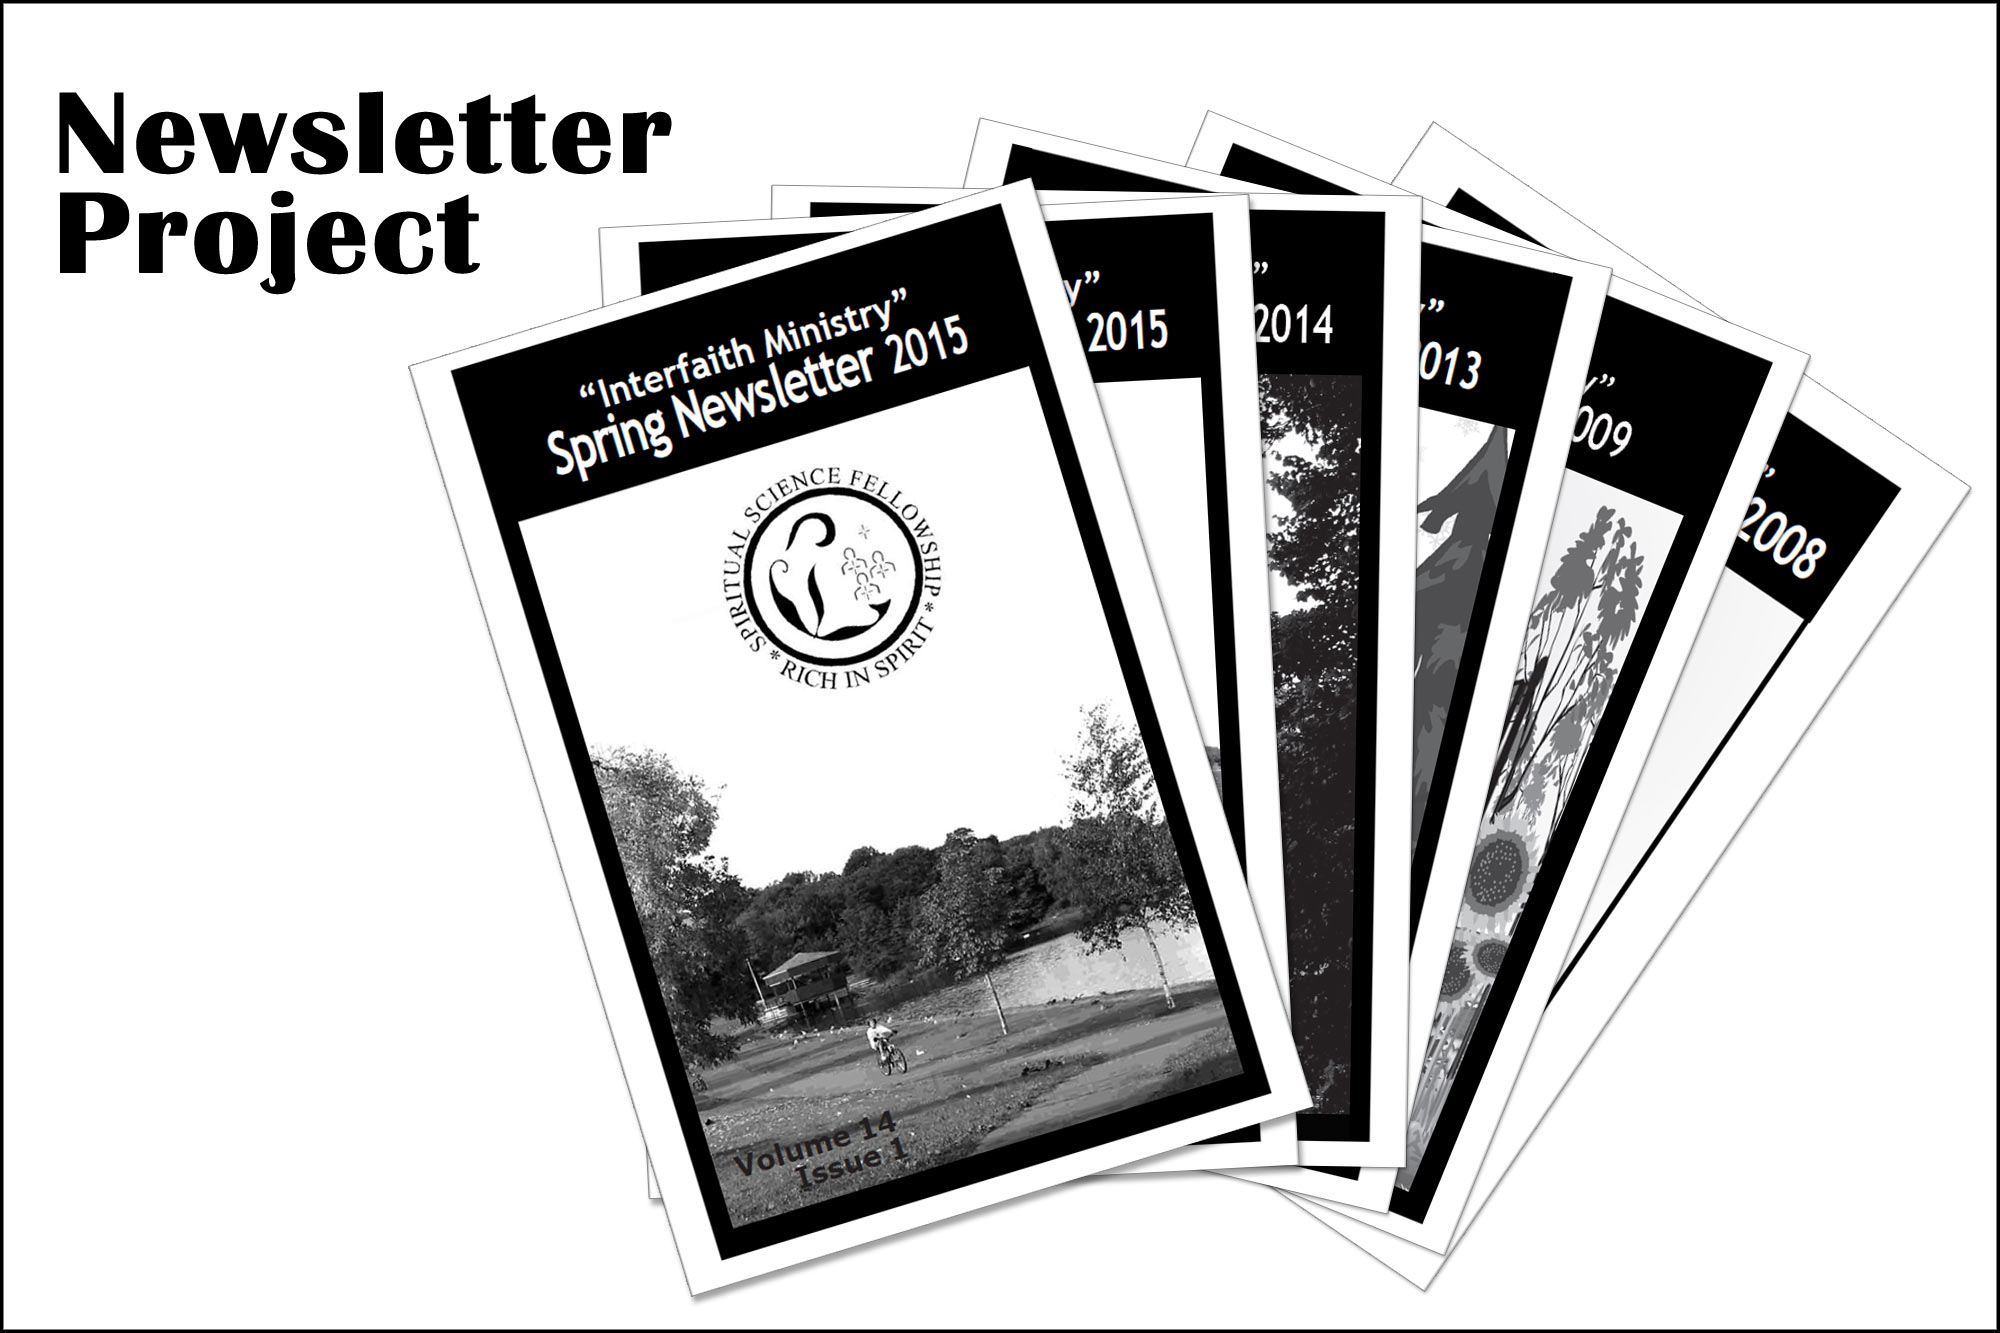 image of several newsletters completed since 2009.